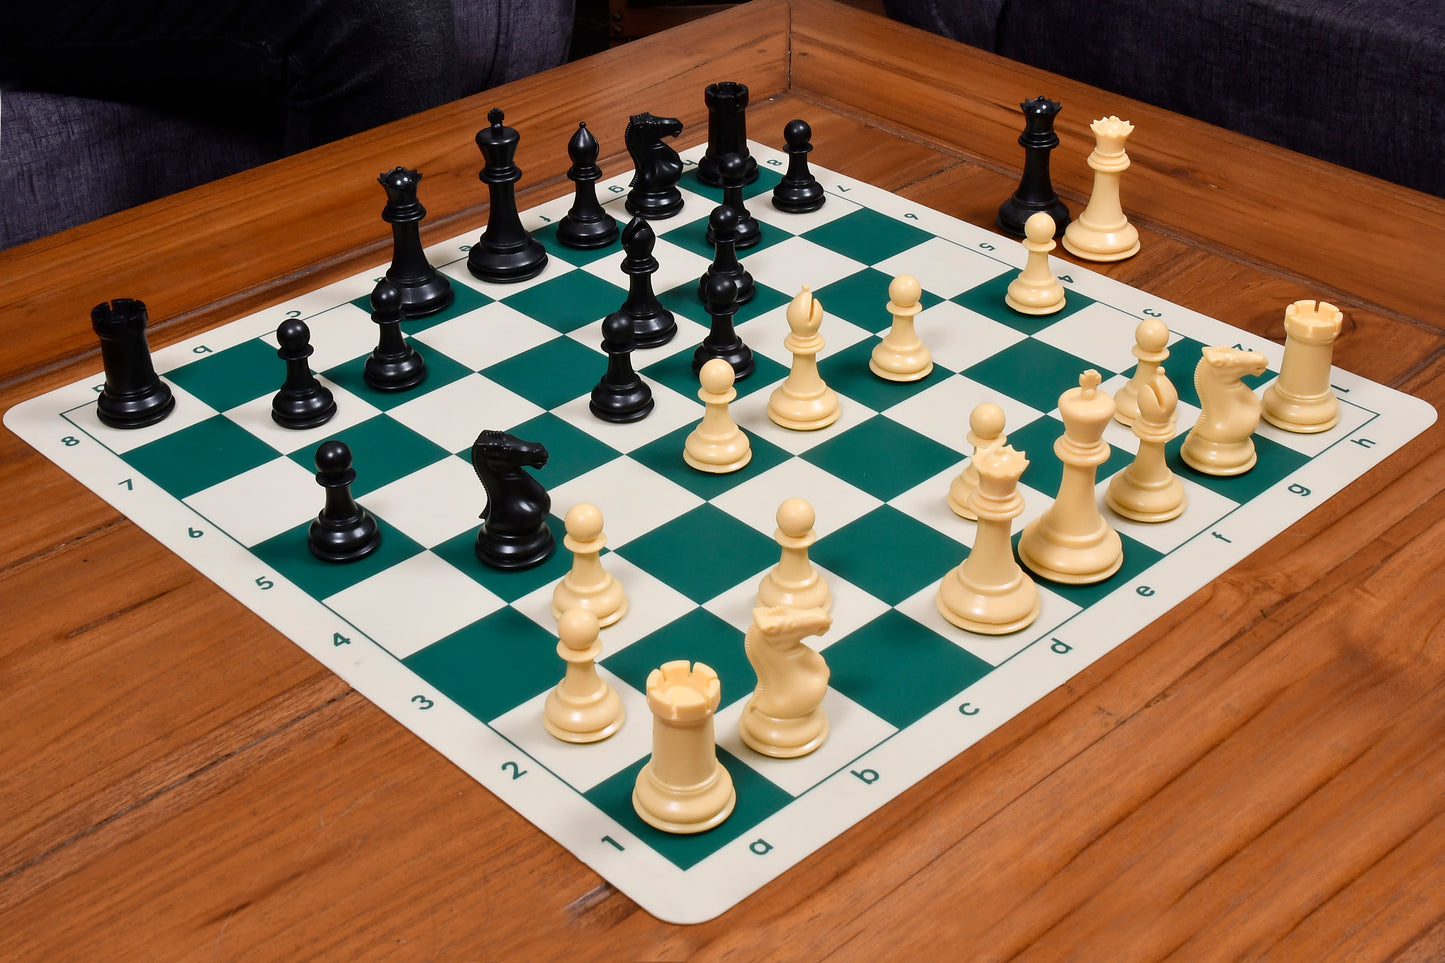 The Professional Staunton Series Chess Pieces in Black Dyed & Natural White Solid Plastic - 3.75" King